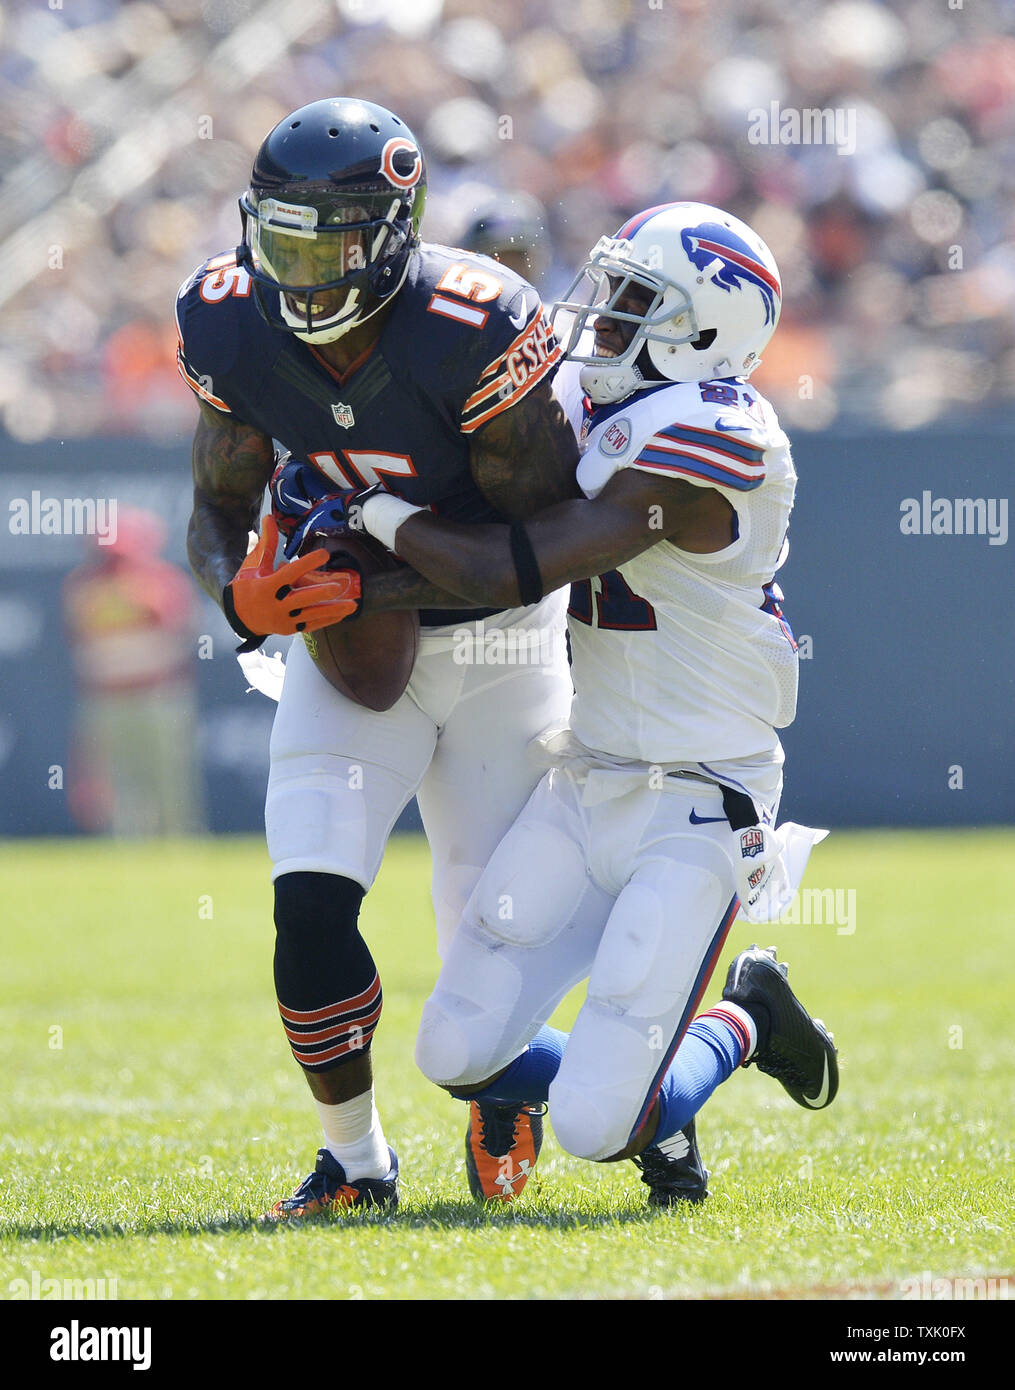 Buffalo Bills cornerback Leodis McKelvin (R) strips the ball from Chicago Bears wide receiver Brandon Marshall during the second quarter at Soldier Field on September 7, 2014 in Chicago. The Bills recovered the fumble.     UPI/Brian Kersey Stock Photo